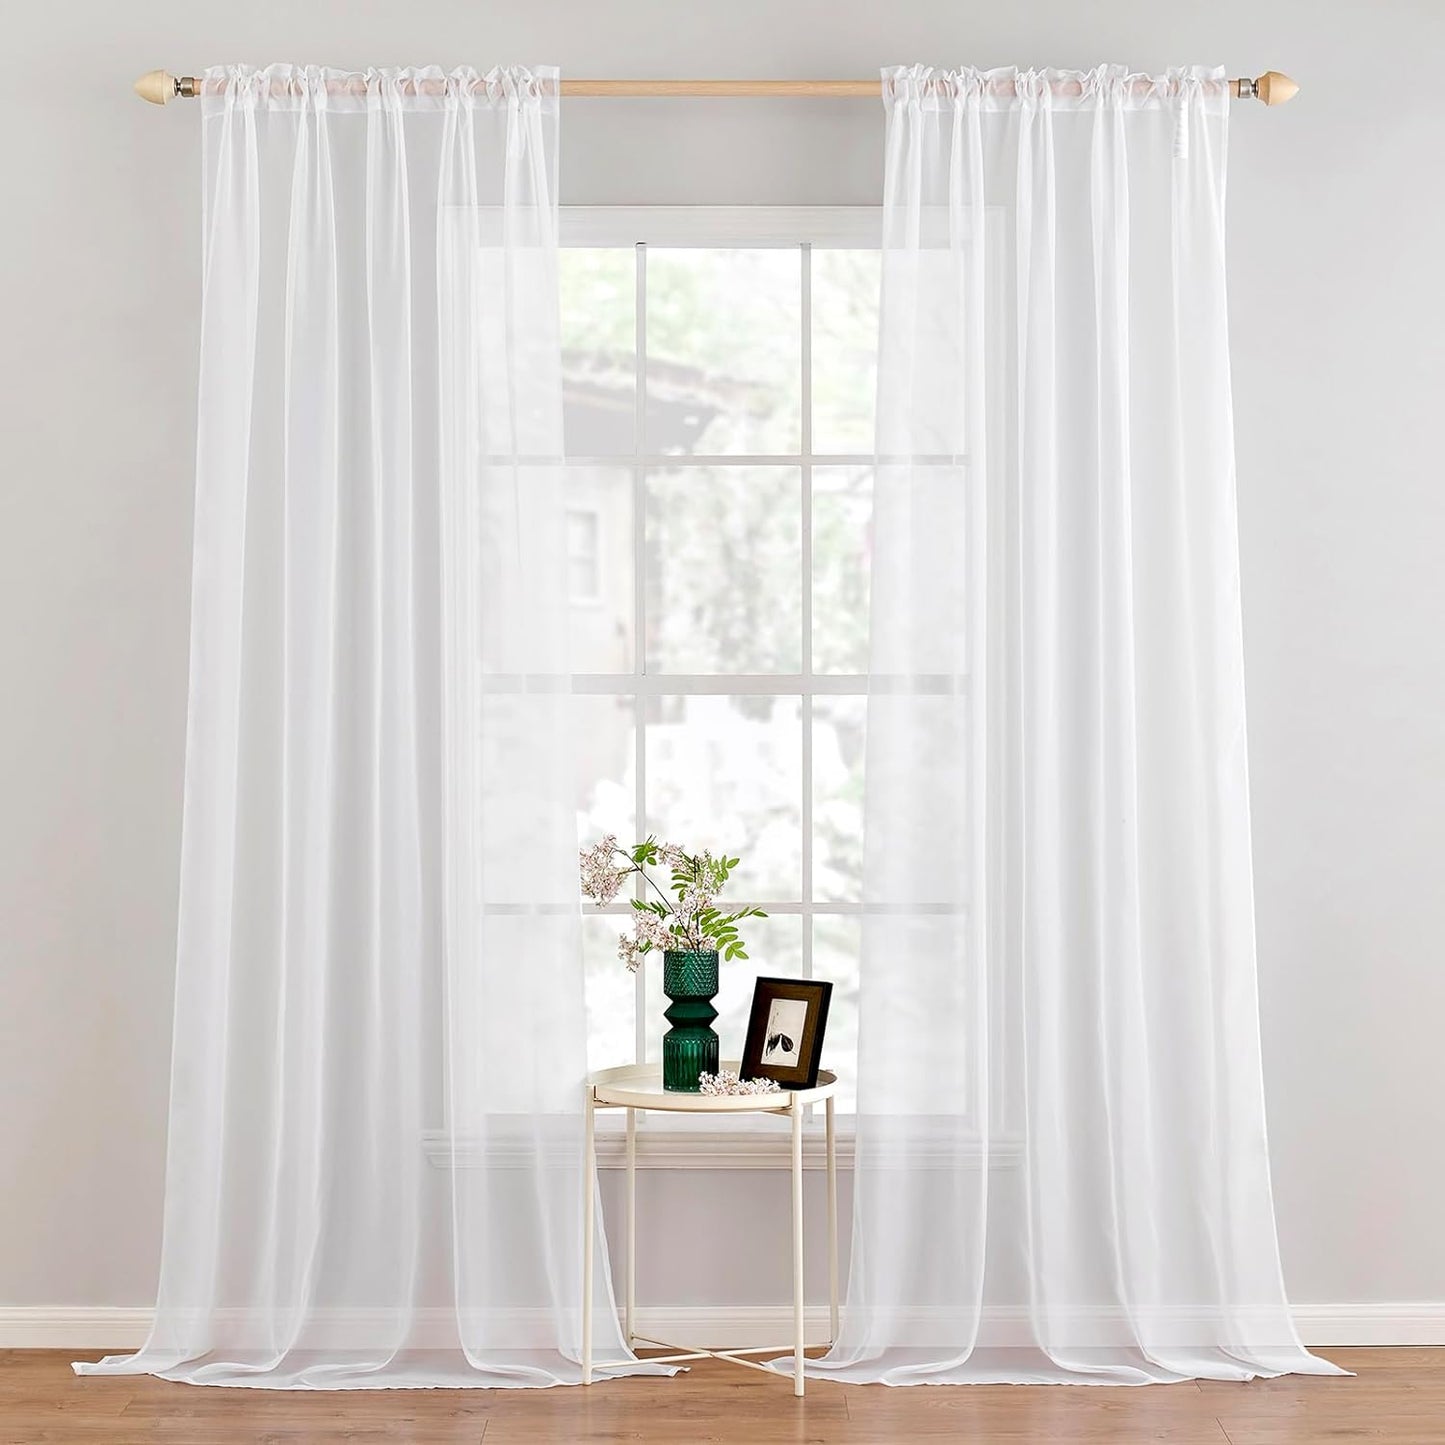 MIULEE White Sheer Curtains 96 Inches Long Window Curtains 2 Panels Solid Color Elegant Window Voile Panels/Drapes/Treatment for Bedroom Living Room (54 X 96 Inches White)  MIULEE White 54''W X 132''L 